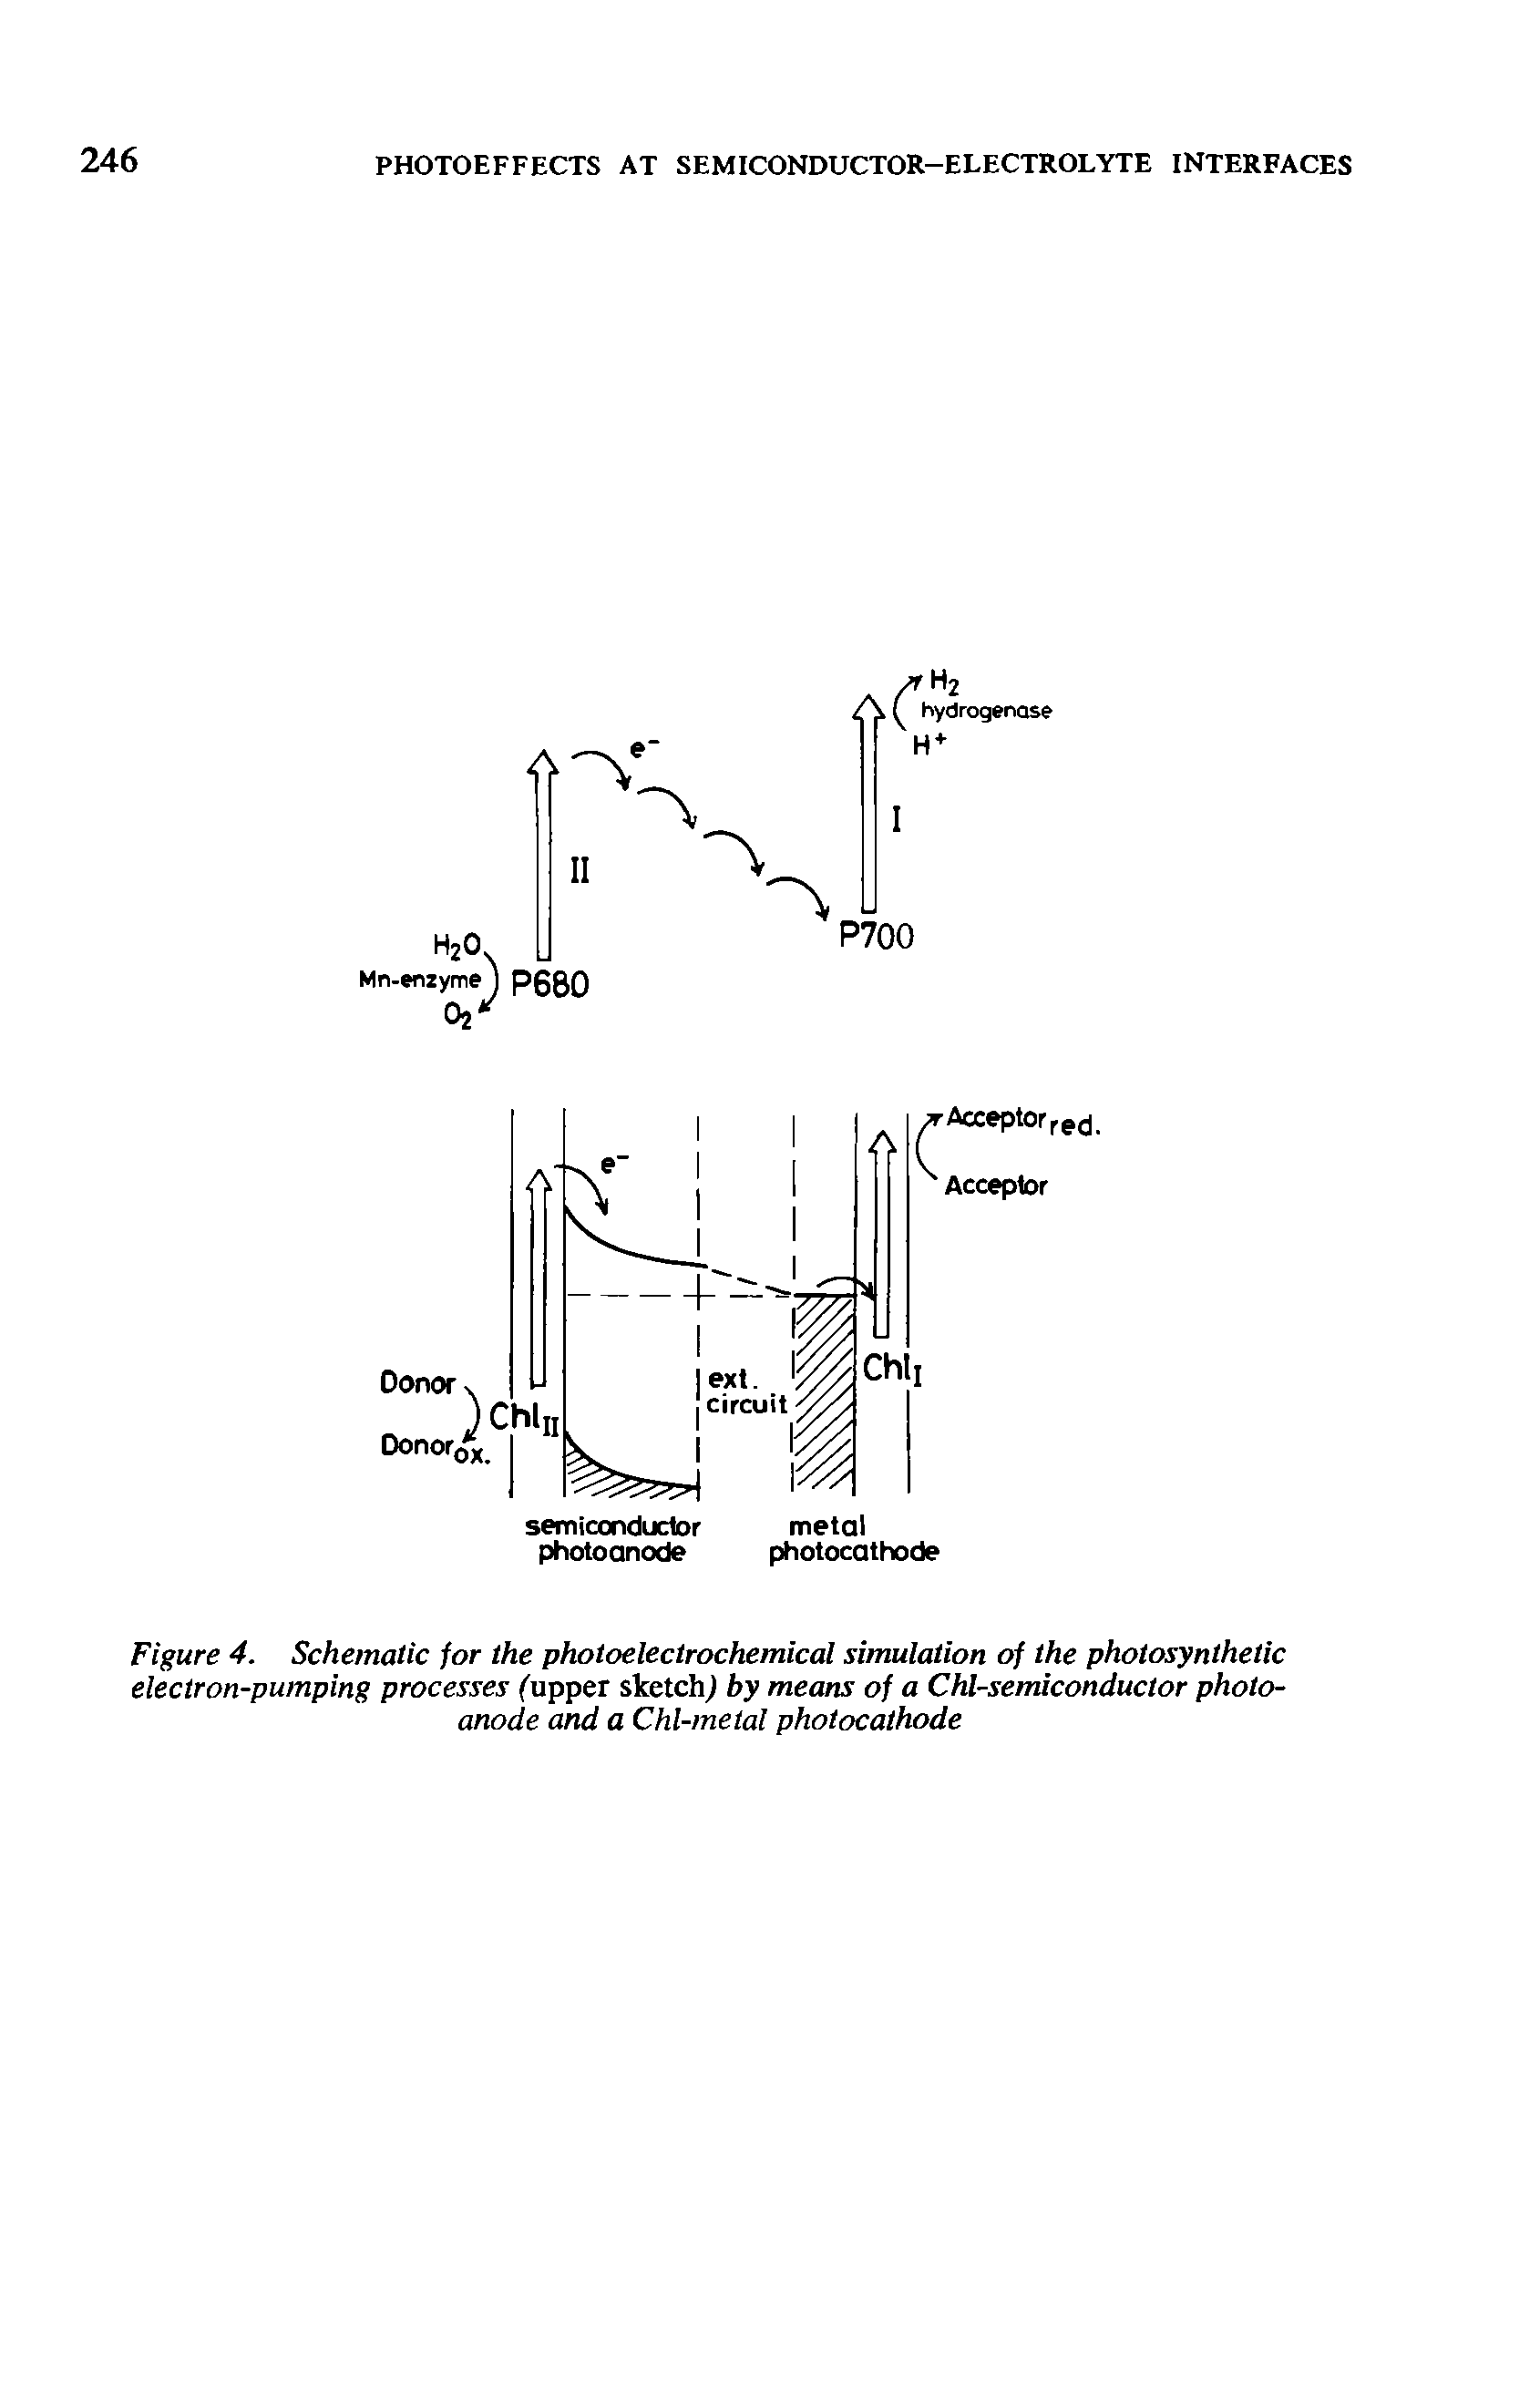 Figure 4. Schematic for the photoelectrochemical simulation of the photosynthetic electron-pumping processes ("upper sketch by means of a Chl-semiconductor photoanode and a Chl-metal photocathode...